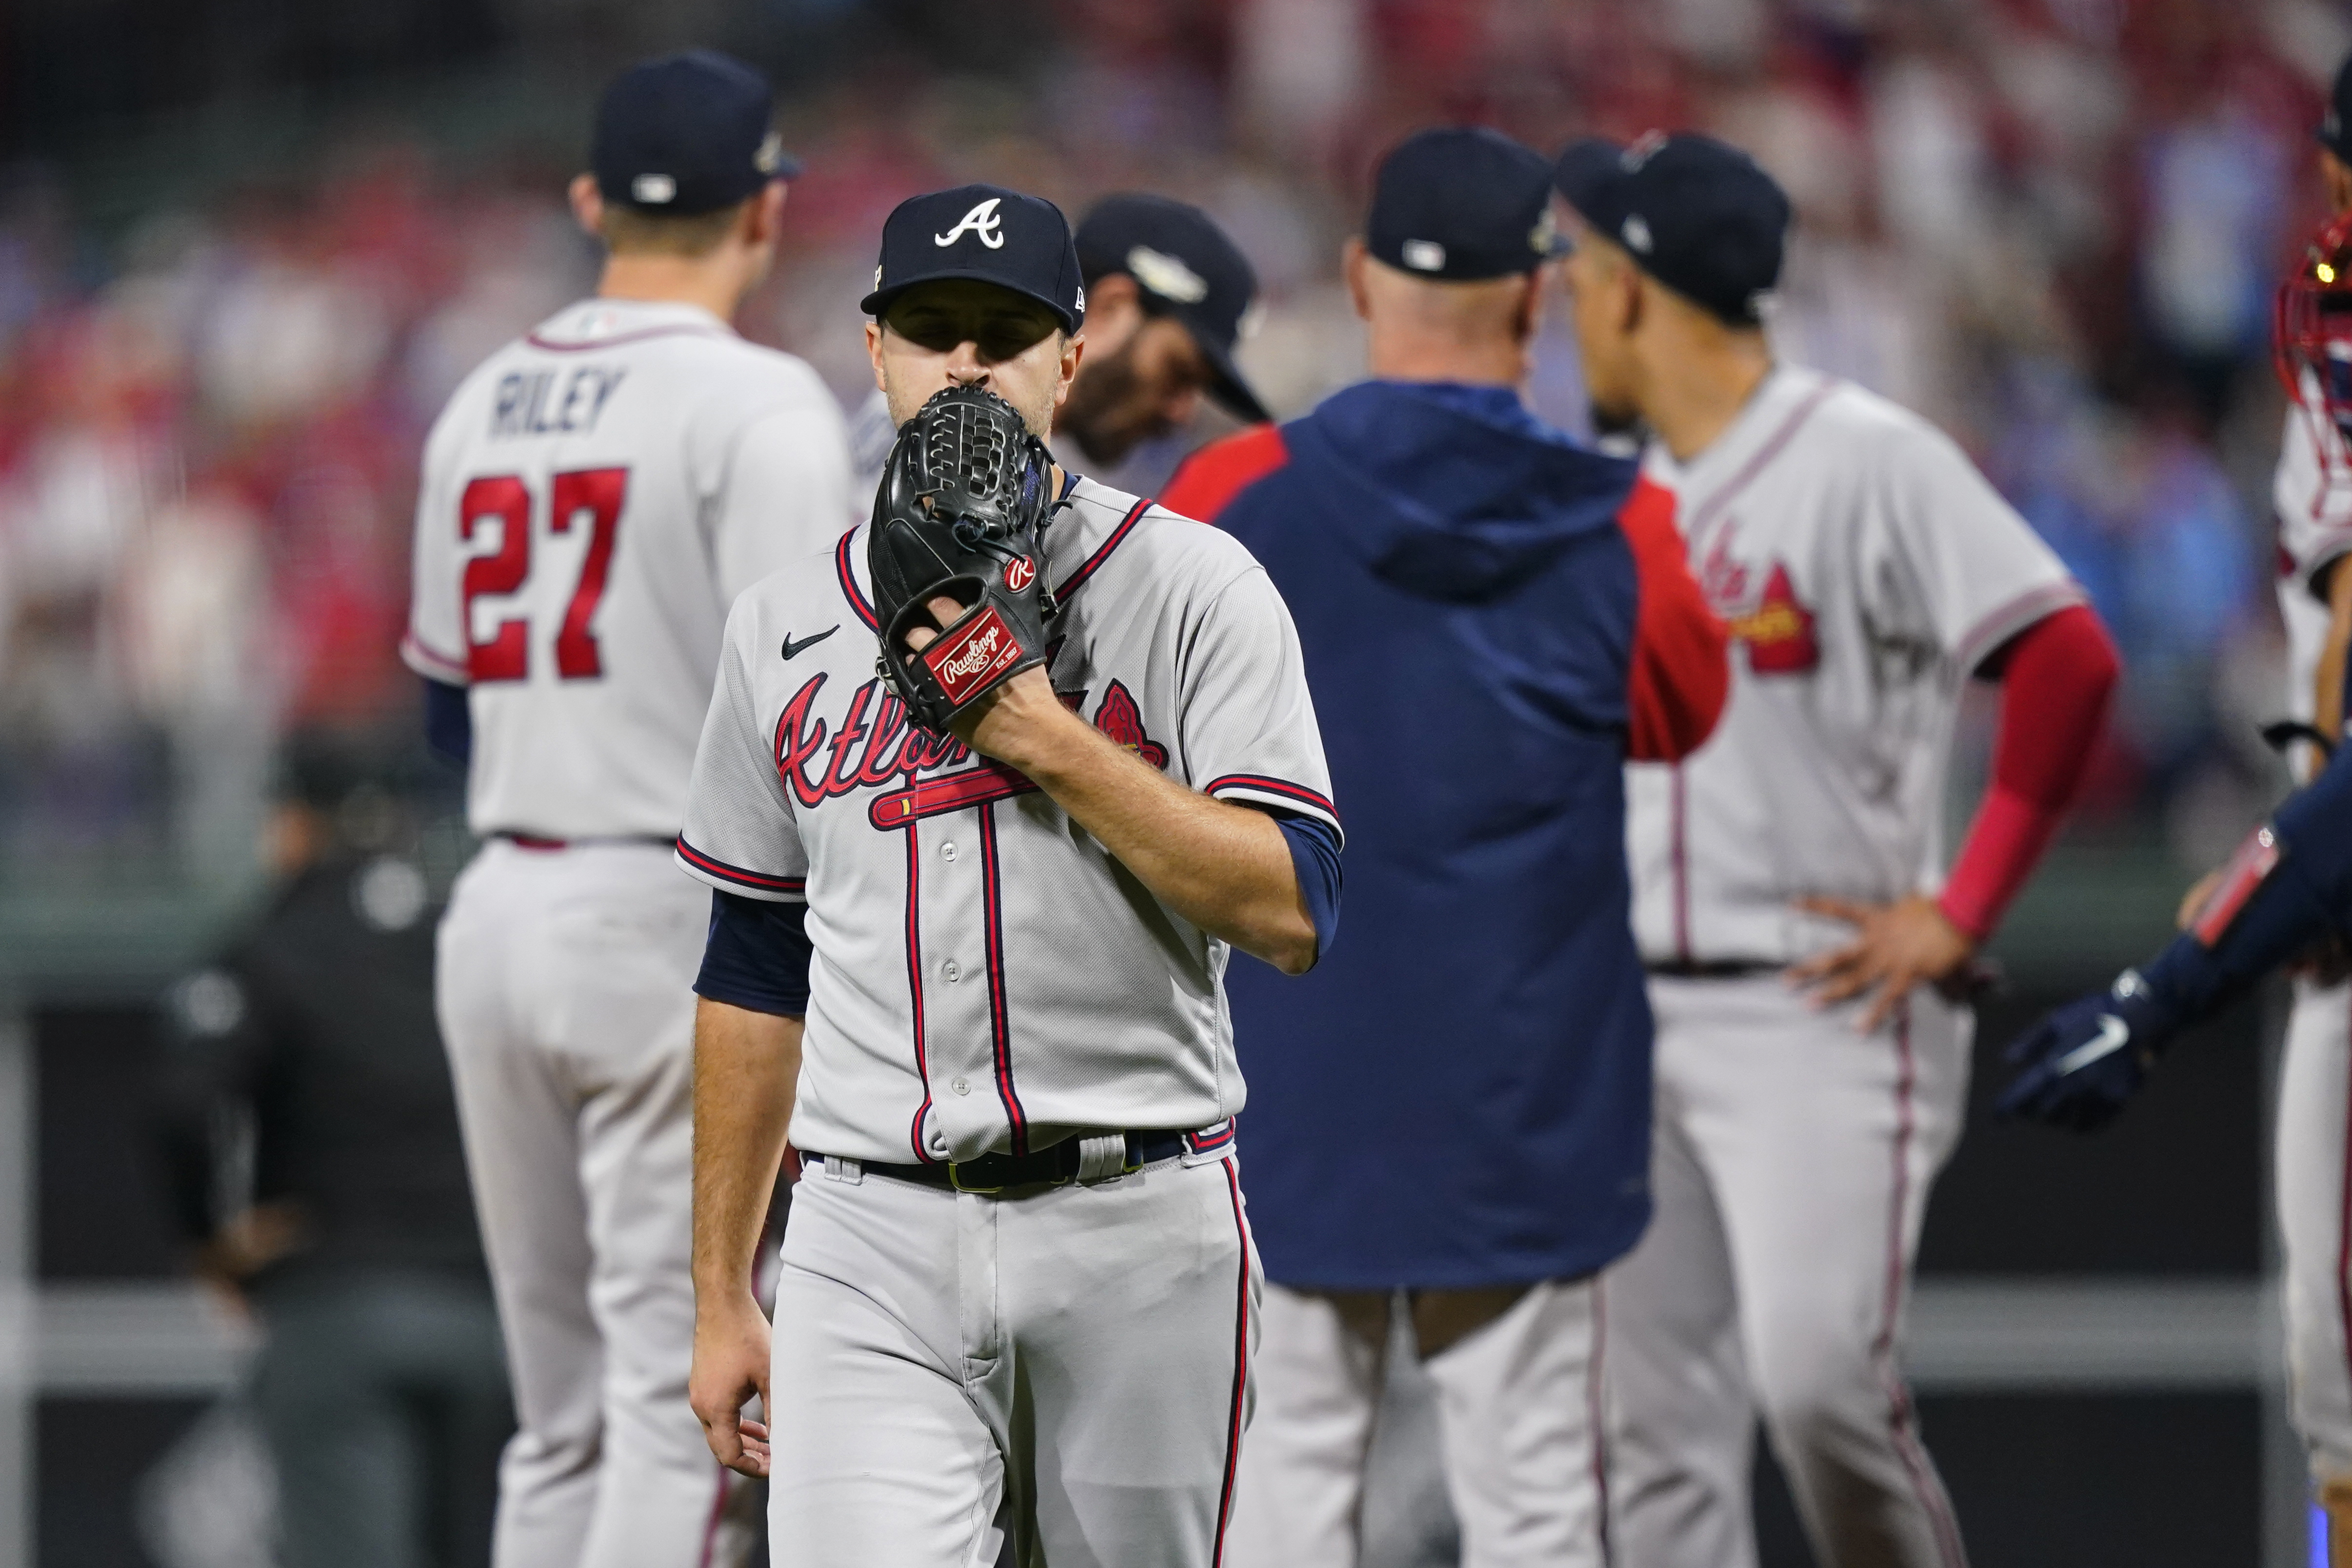 Braves reeling after playoff flop, but excited for future – WABE